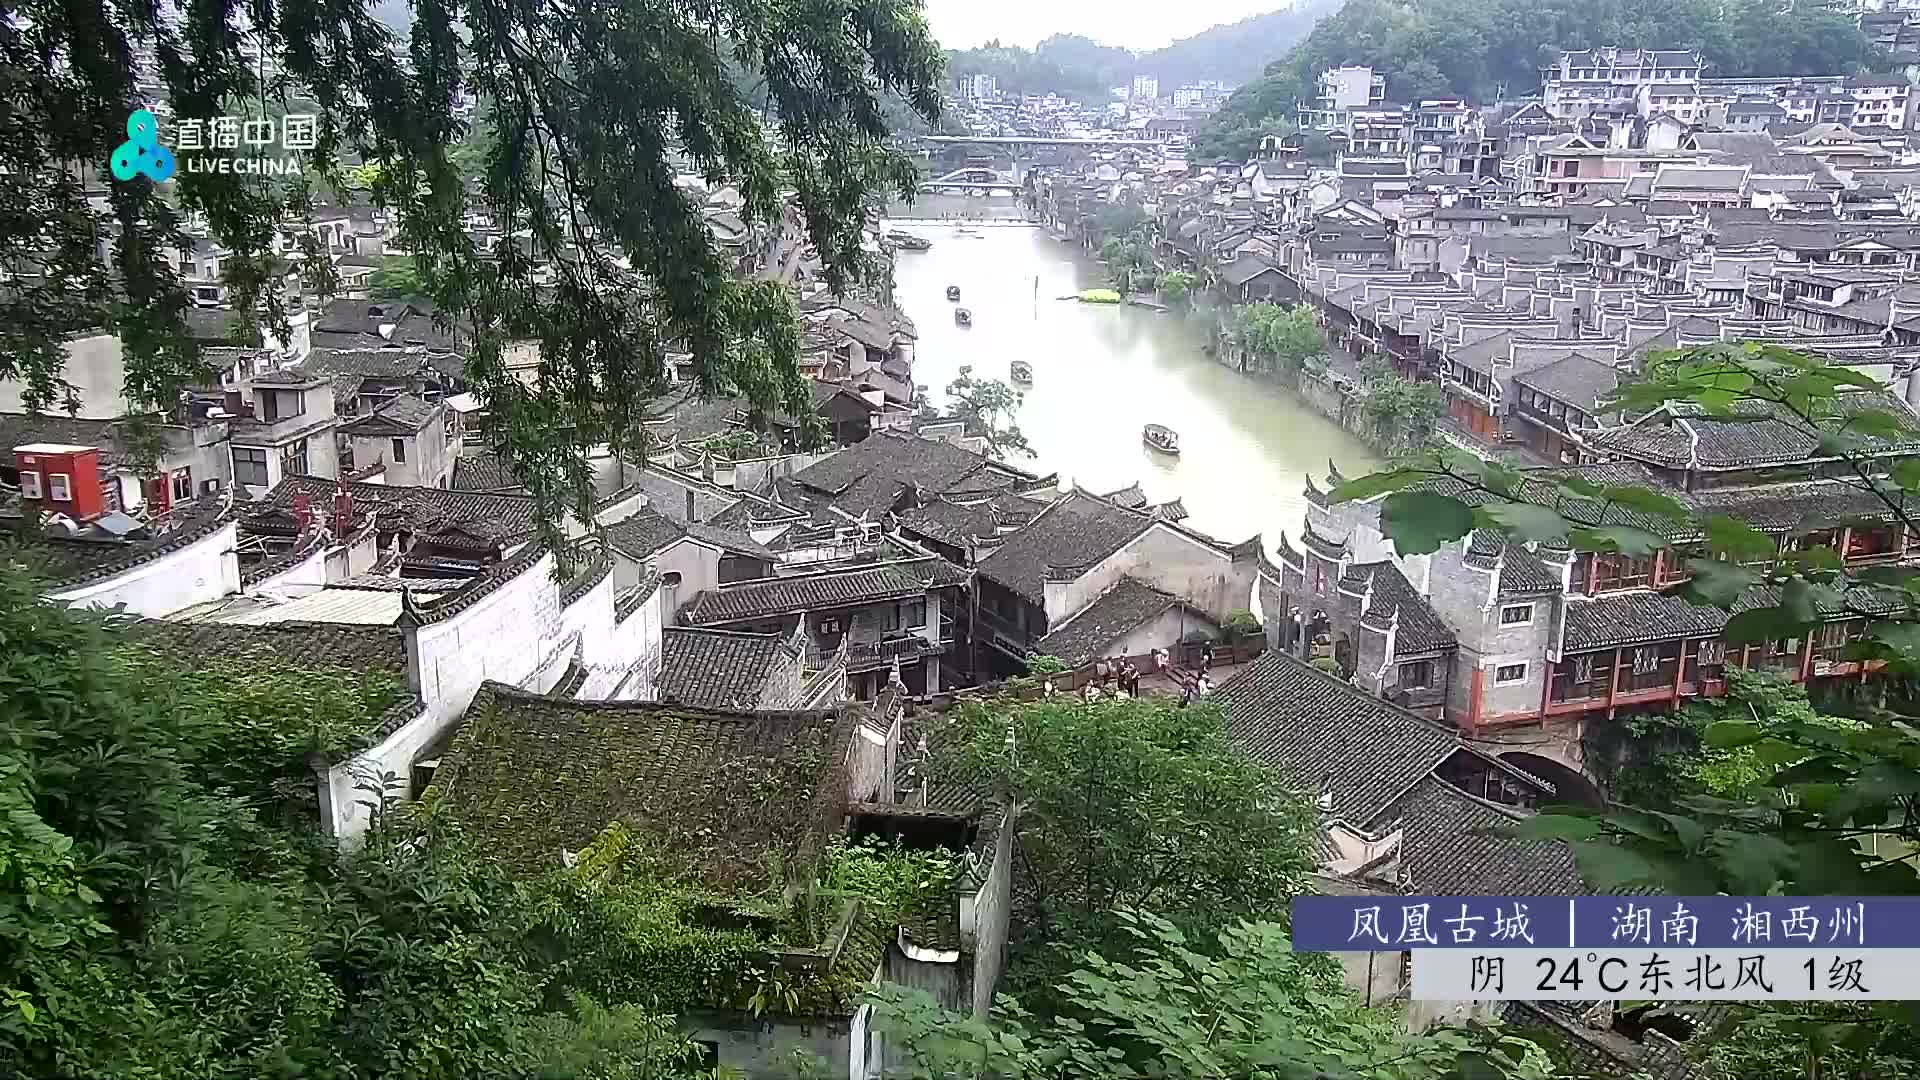 Fenghuang Dom. 08:48